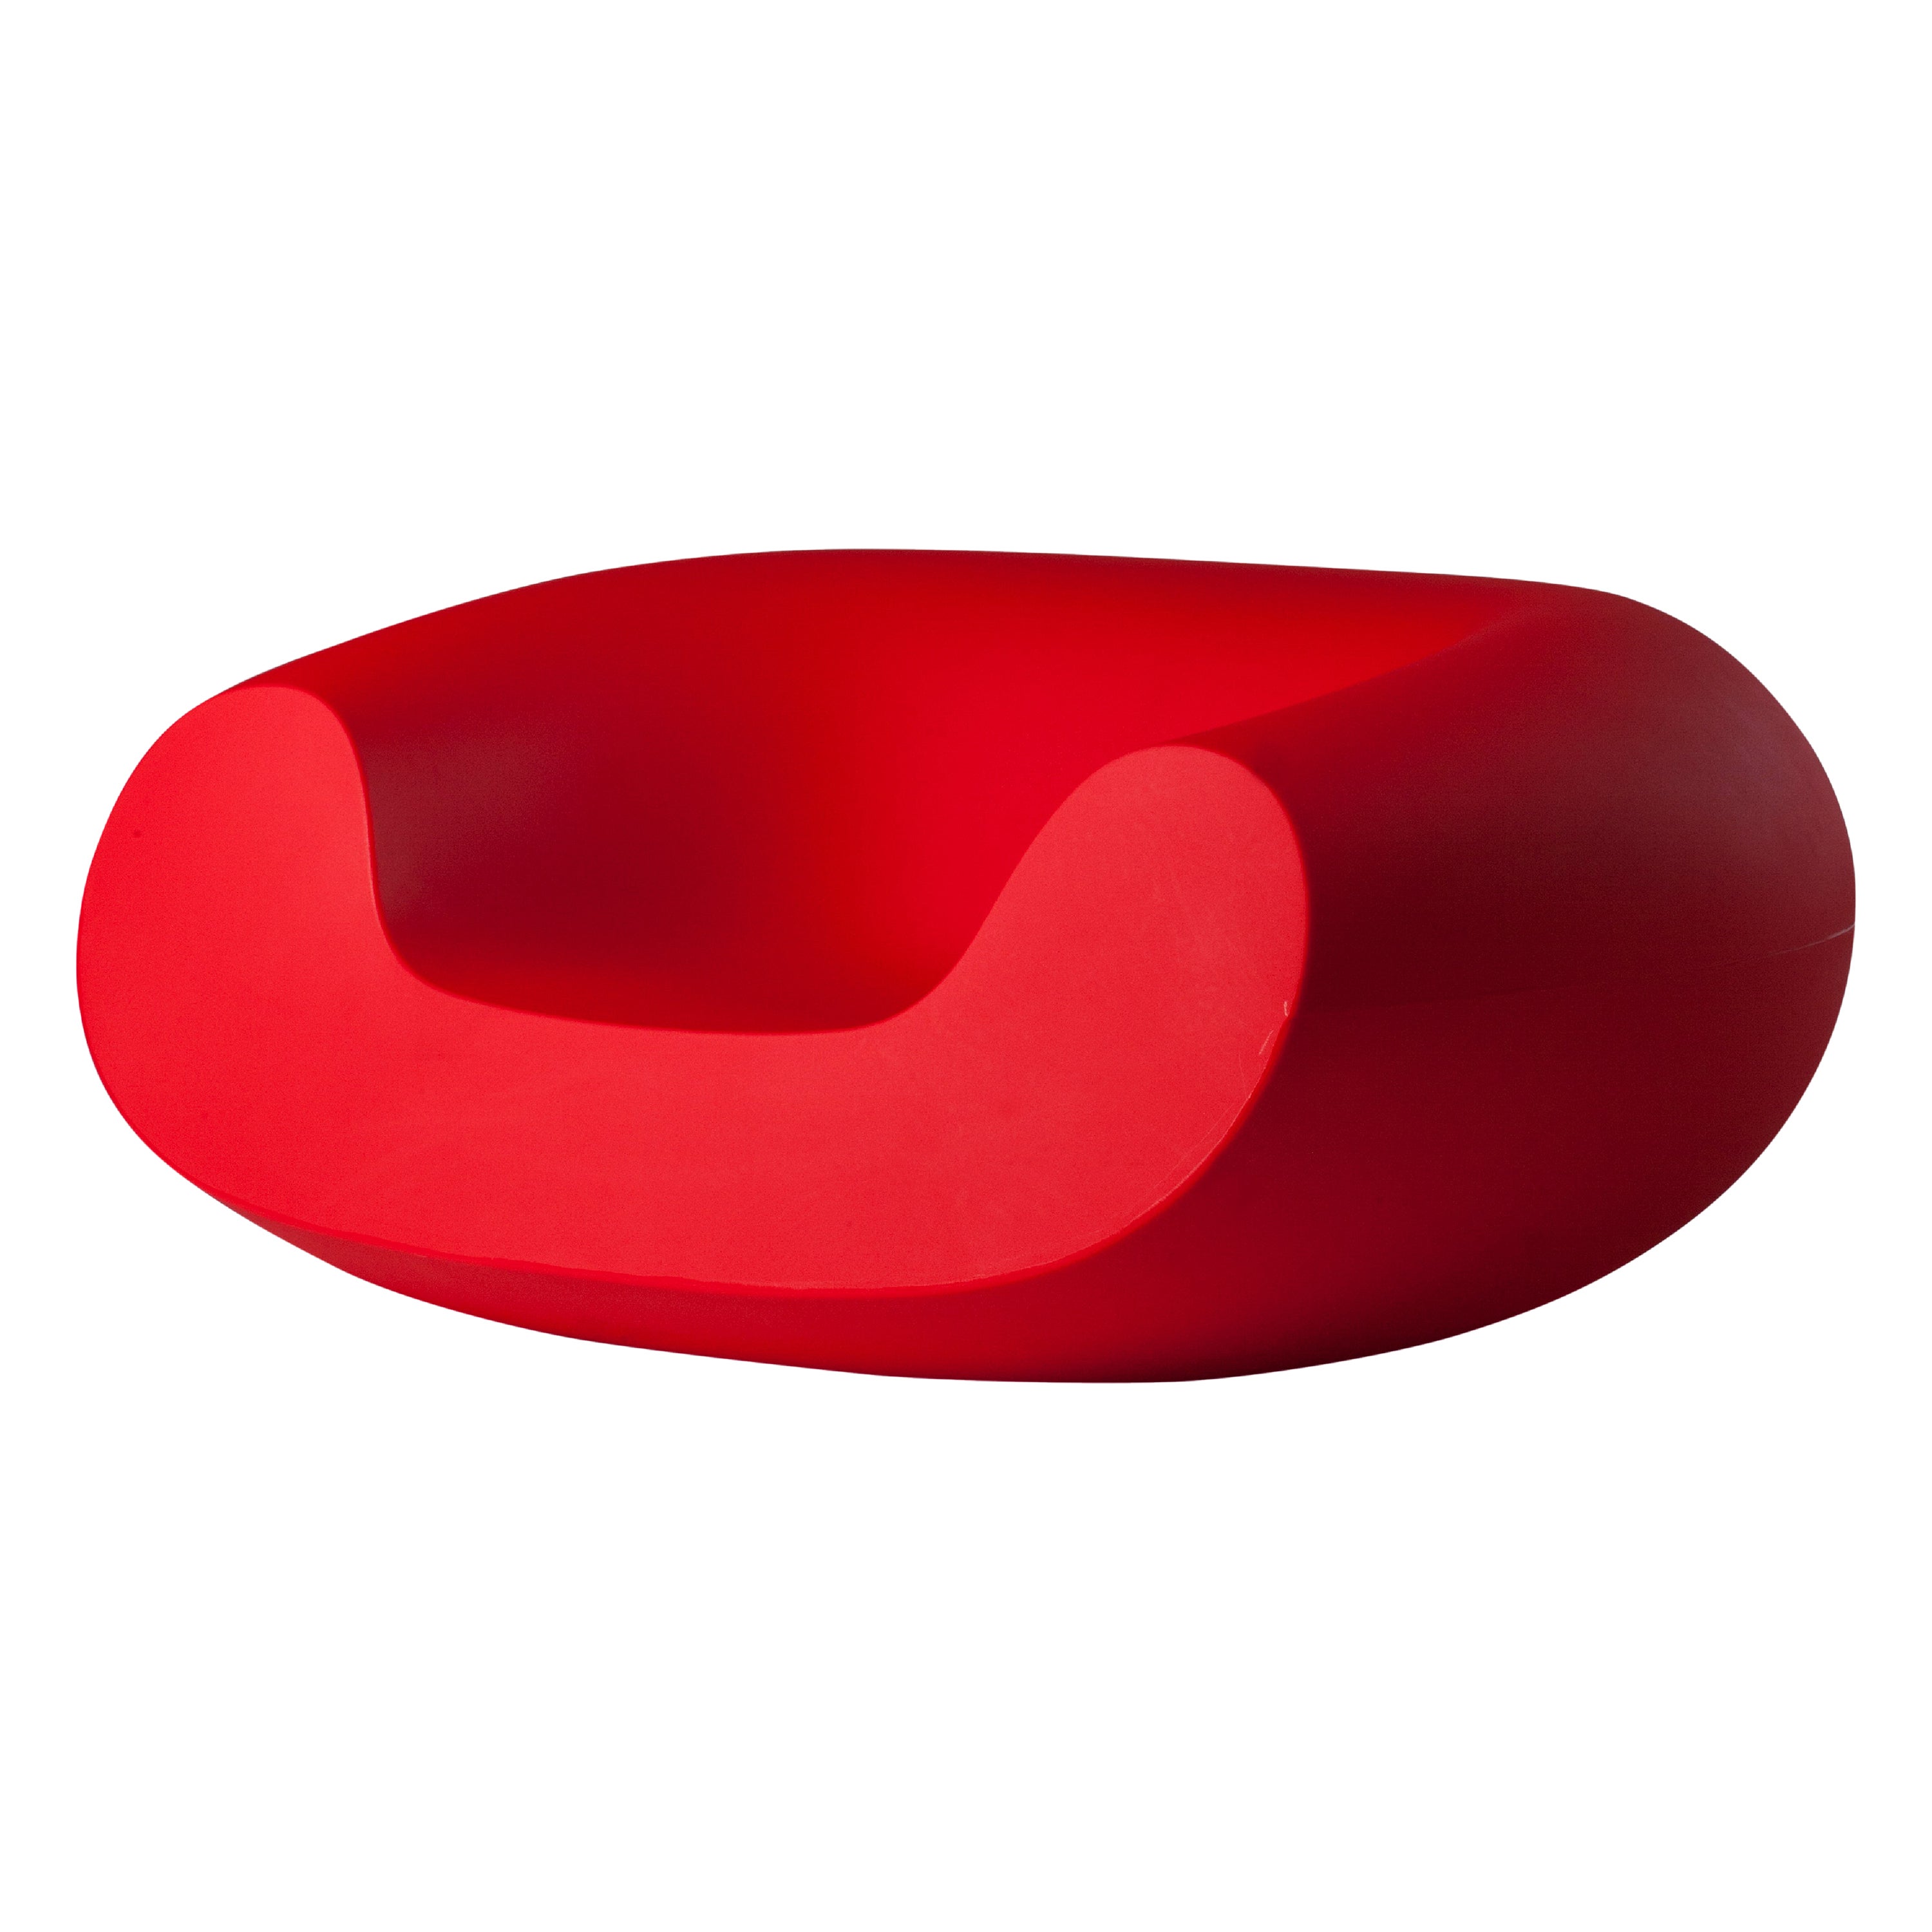 Slide Design Chubby Lounge Armchair in Flame Red by Marcel Wanders